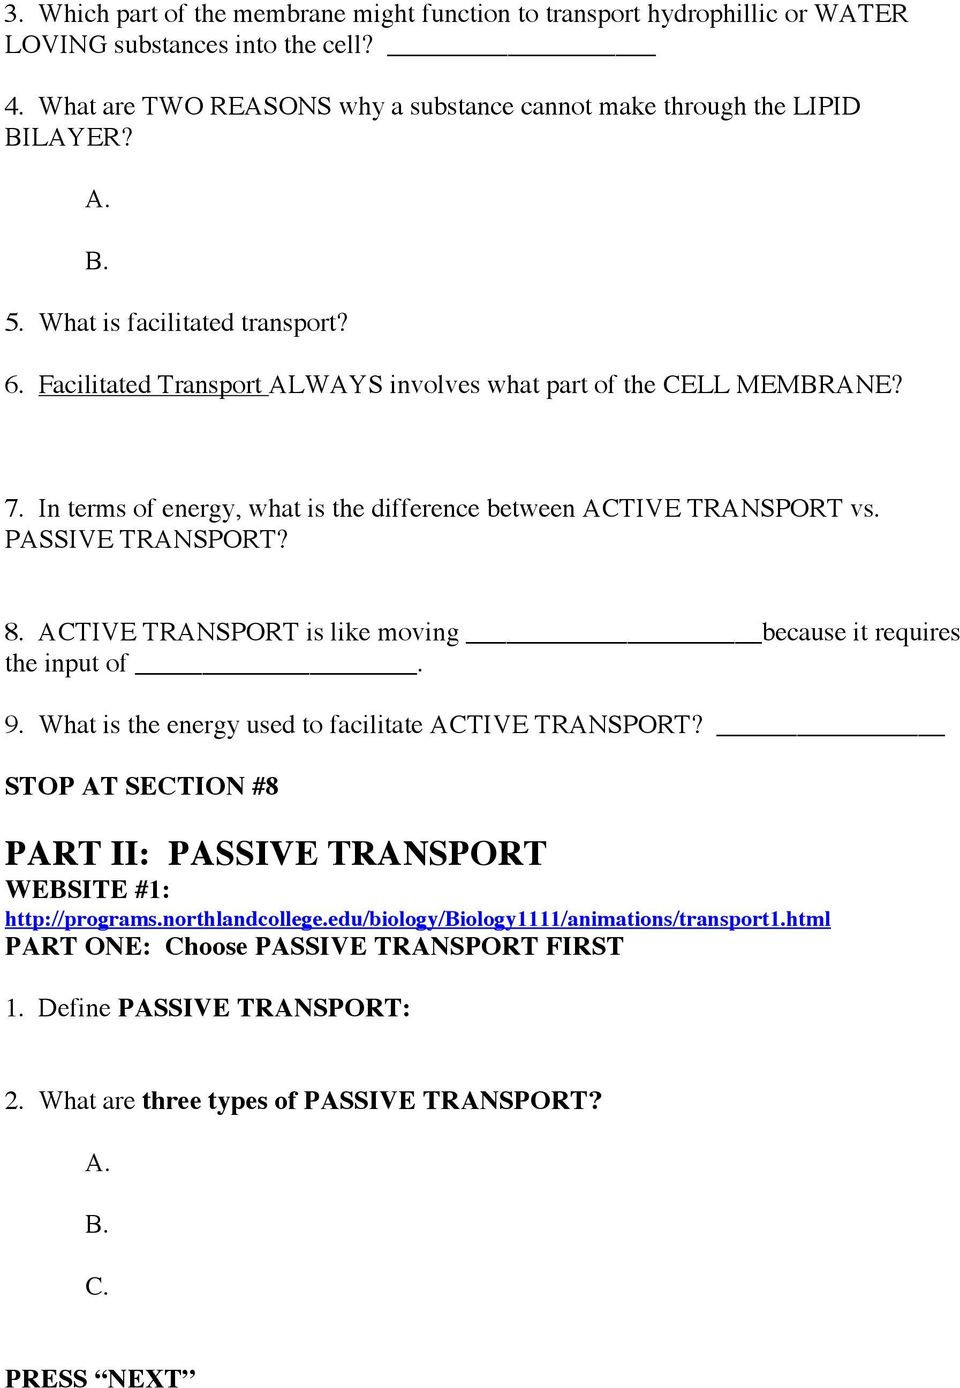 Cell Transport Worksheet Answers Cell Membrane &amp; Cell Transport Passive and Active Webquest